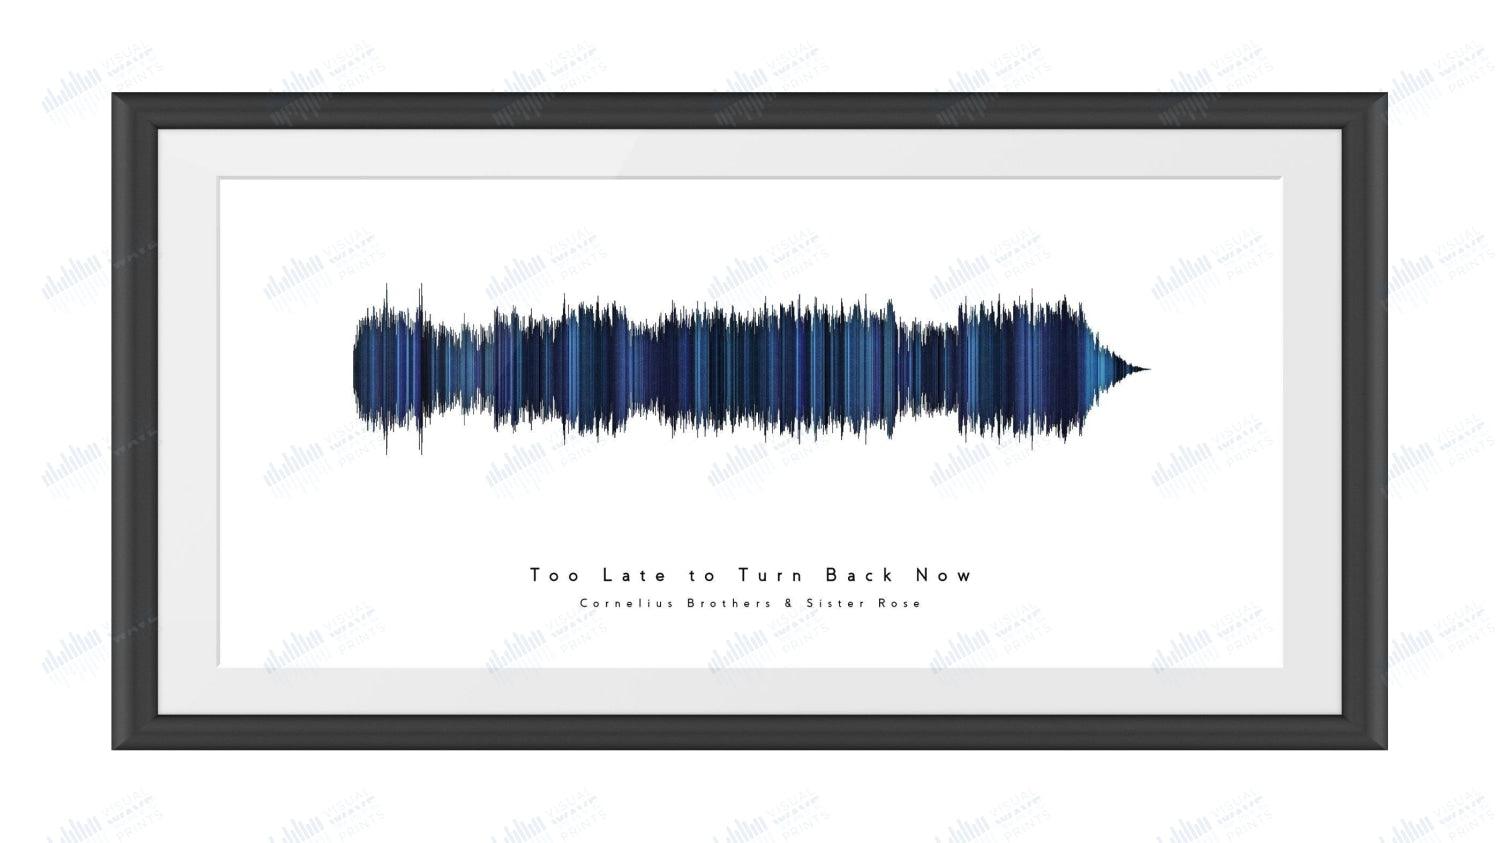 Too Late to Turn Back Now by Cornelius Brothers & Sister Rose - Visual Wave Prints